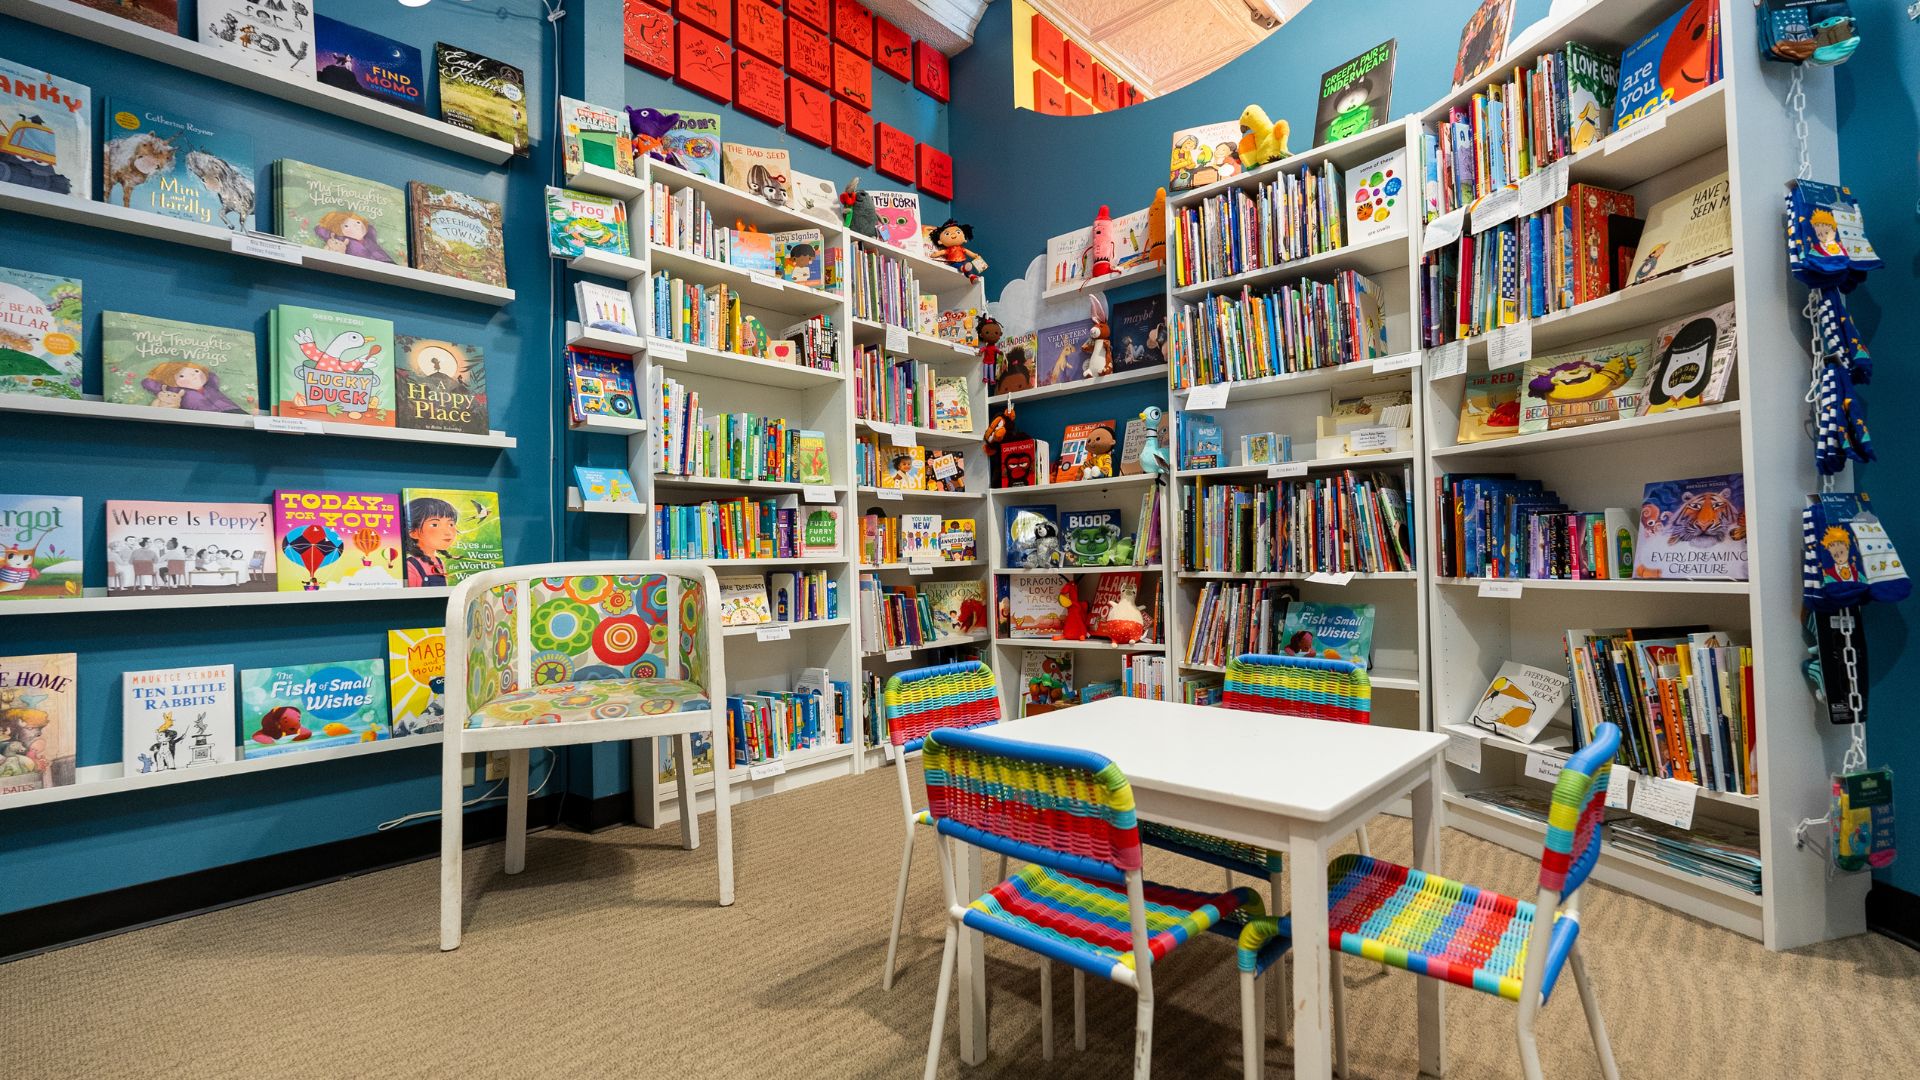 The Novel Neighbor has a cozy corner with picture books and stuffed animals.